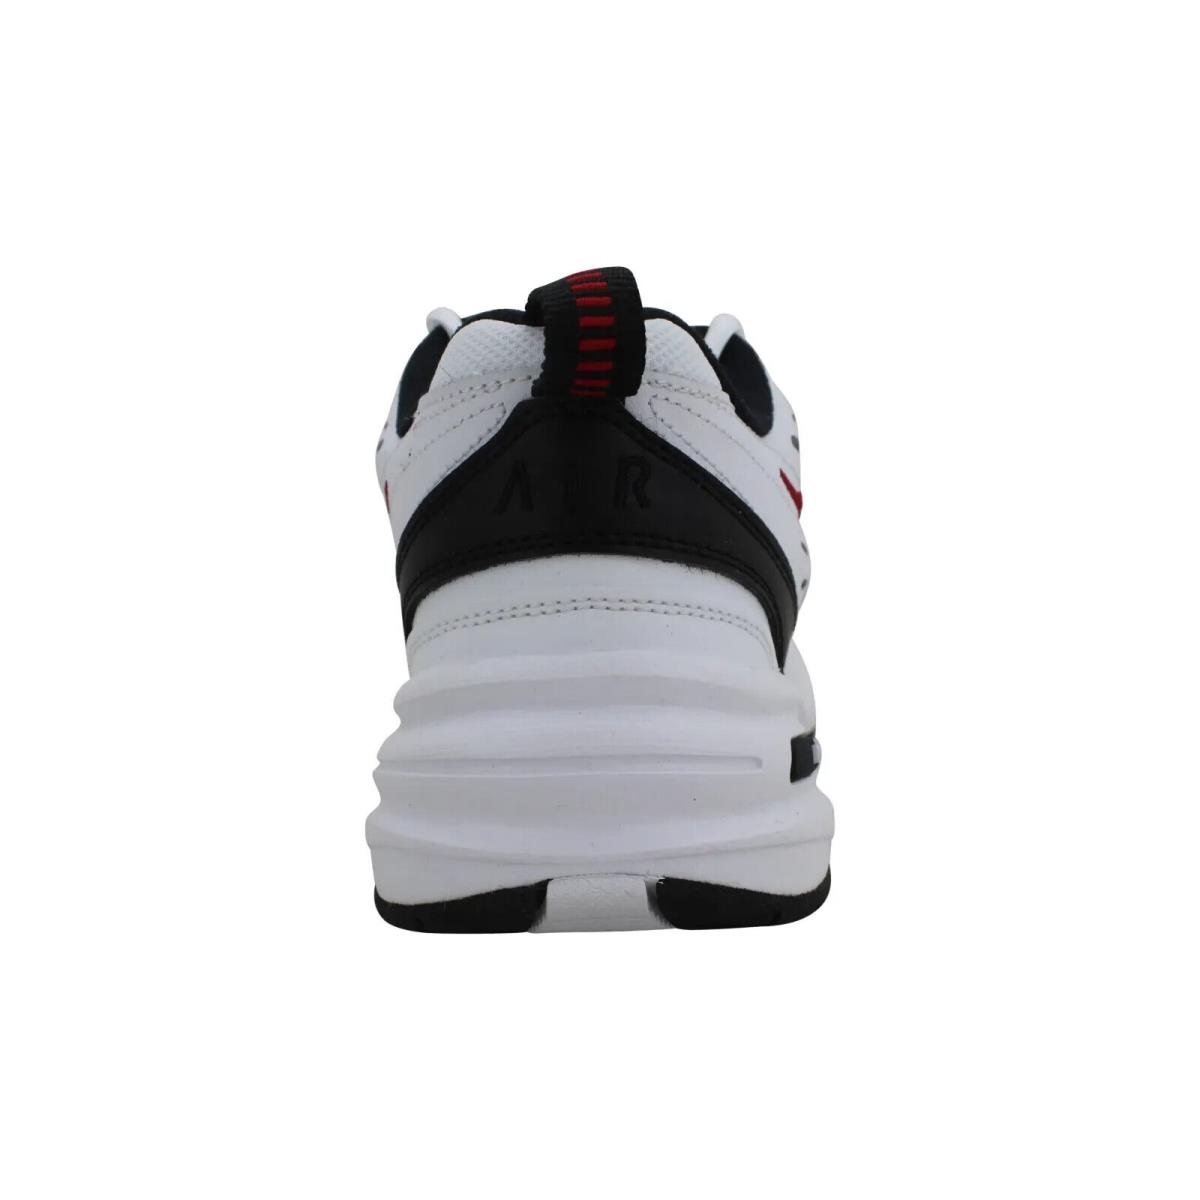 Nike shoes  - White/Black/Red 4